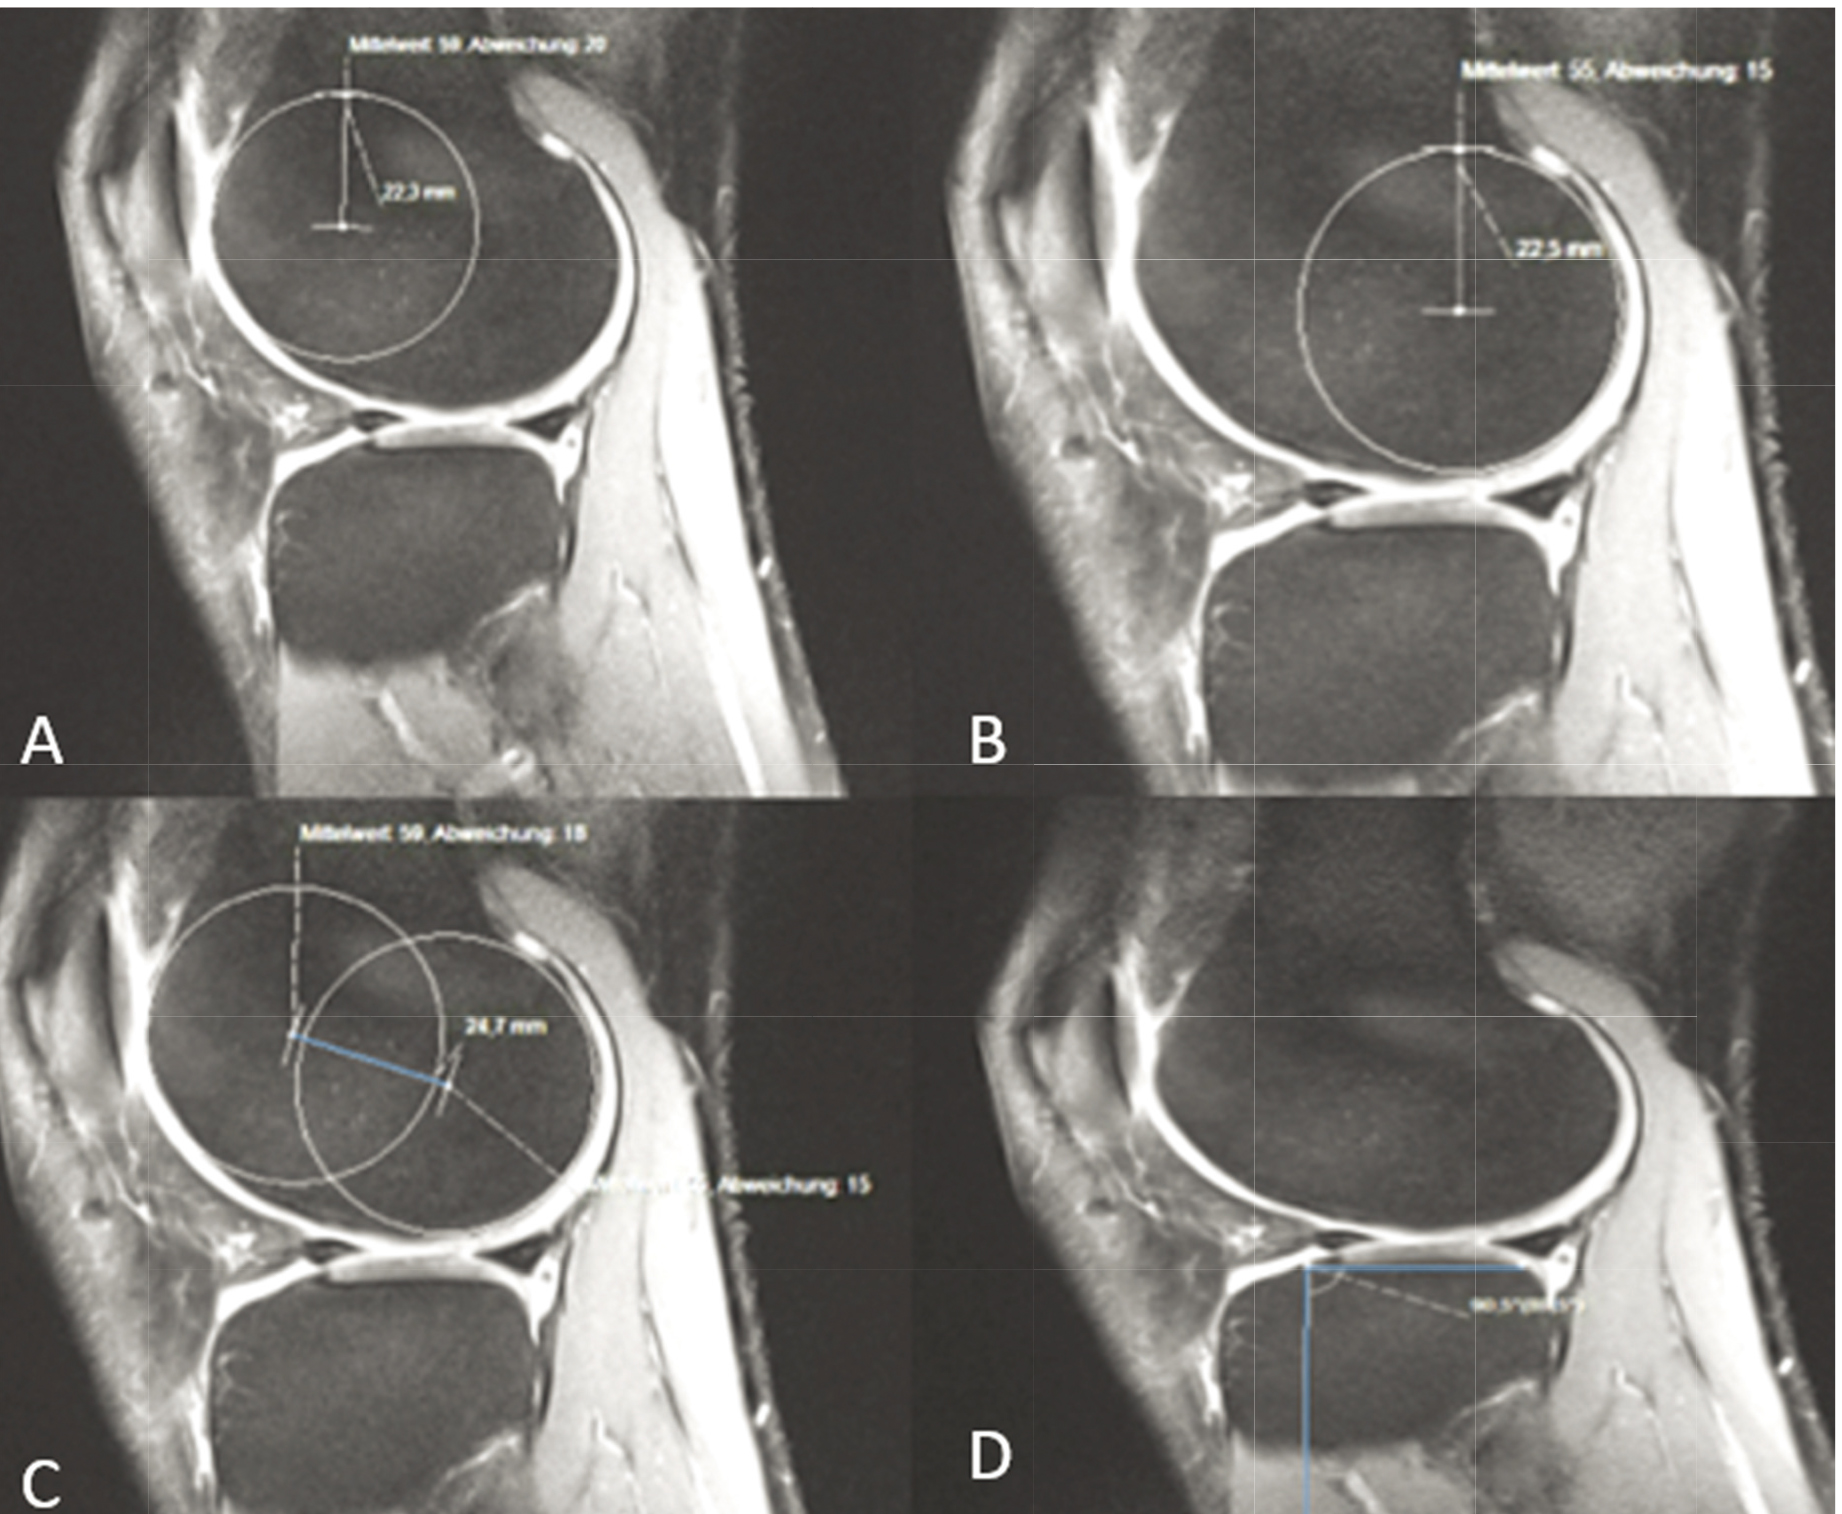 Variables 5–7 and 11 are shown in section A–D. A: Variable 5 (extension facet of the lateral femoral condyle). B: Variable 6 (flexion facet of the lateral femoral condyle). C: Variable 7 (distance between the circle-centers of the lateral femoral condyle). D: Variable 11 (angle between tibial plateau and tibial shaft lateral). Determination of the extension and flexion facet of the medial femoral condyle as well as the distance between the circle-centers was performed according to the demonstrated technique on the lateral side. Same applies to the determination of the medial tibial slope.